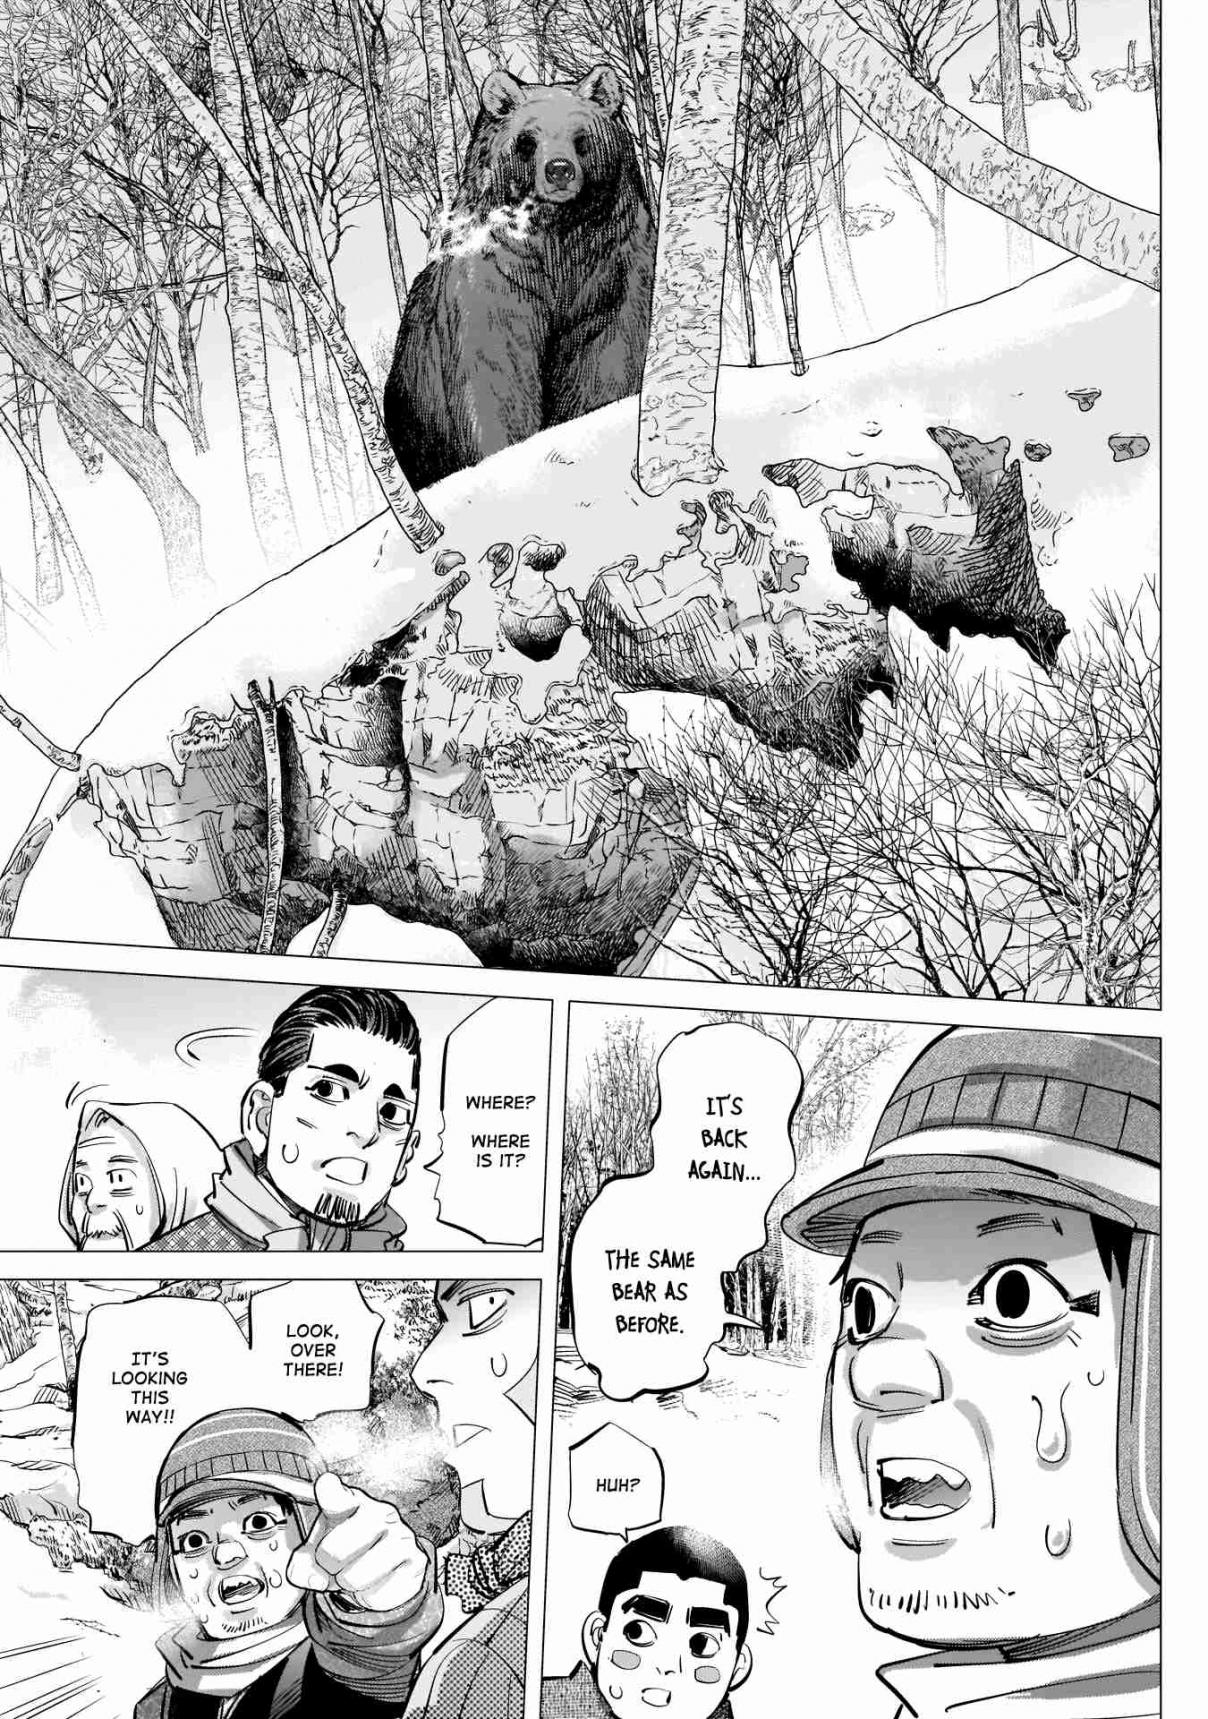 Golden Kamuy Ch. 218 The Gold Dust Panners